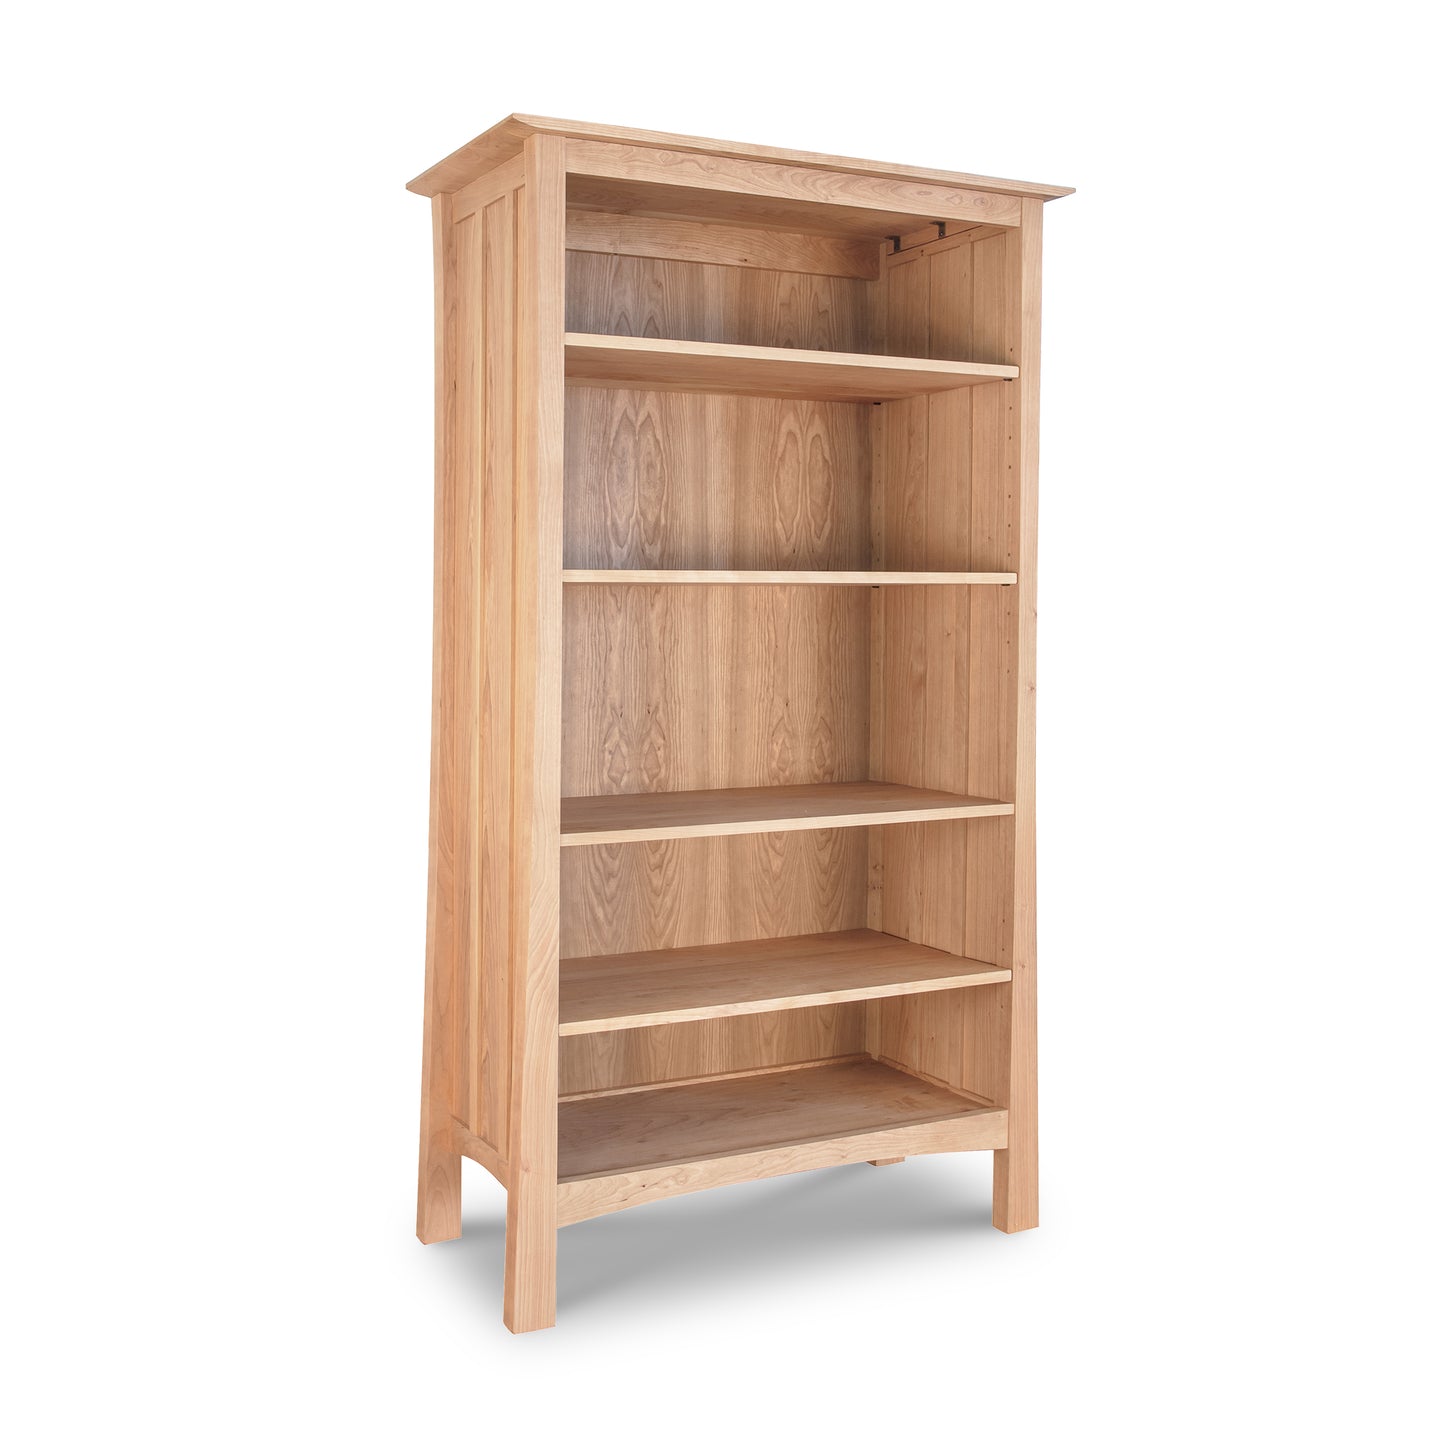 A Vermont Furniture Designs Contemporary Craftsman Custom Bookcase with four shelves, isolated on a white background.